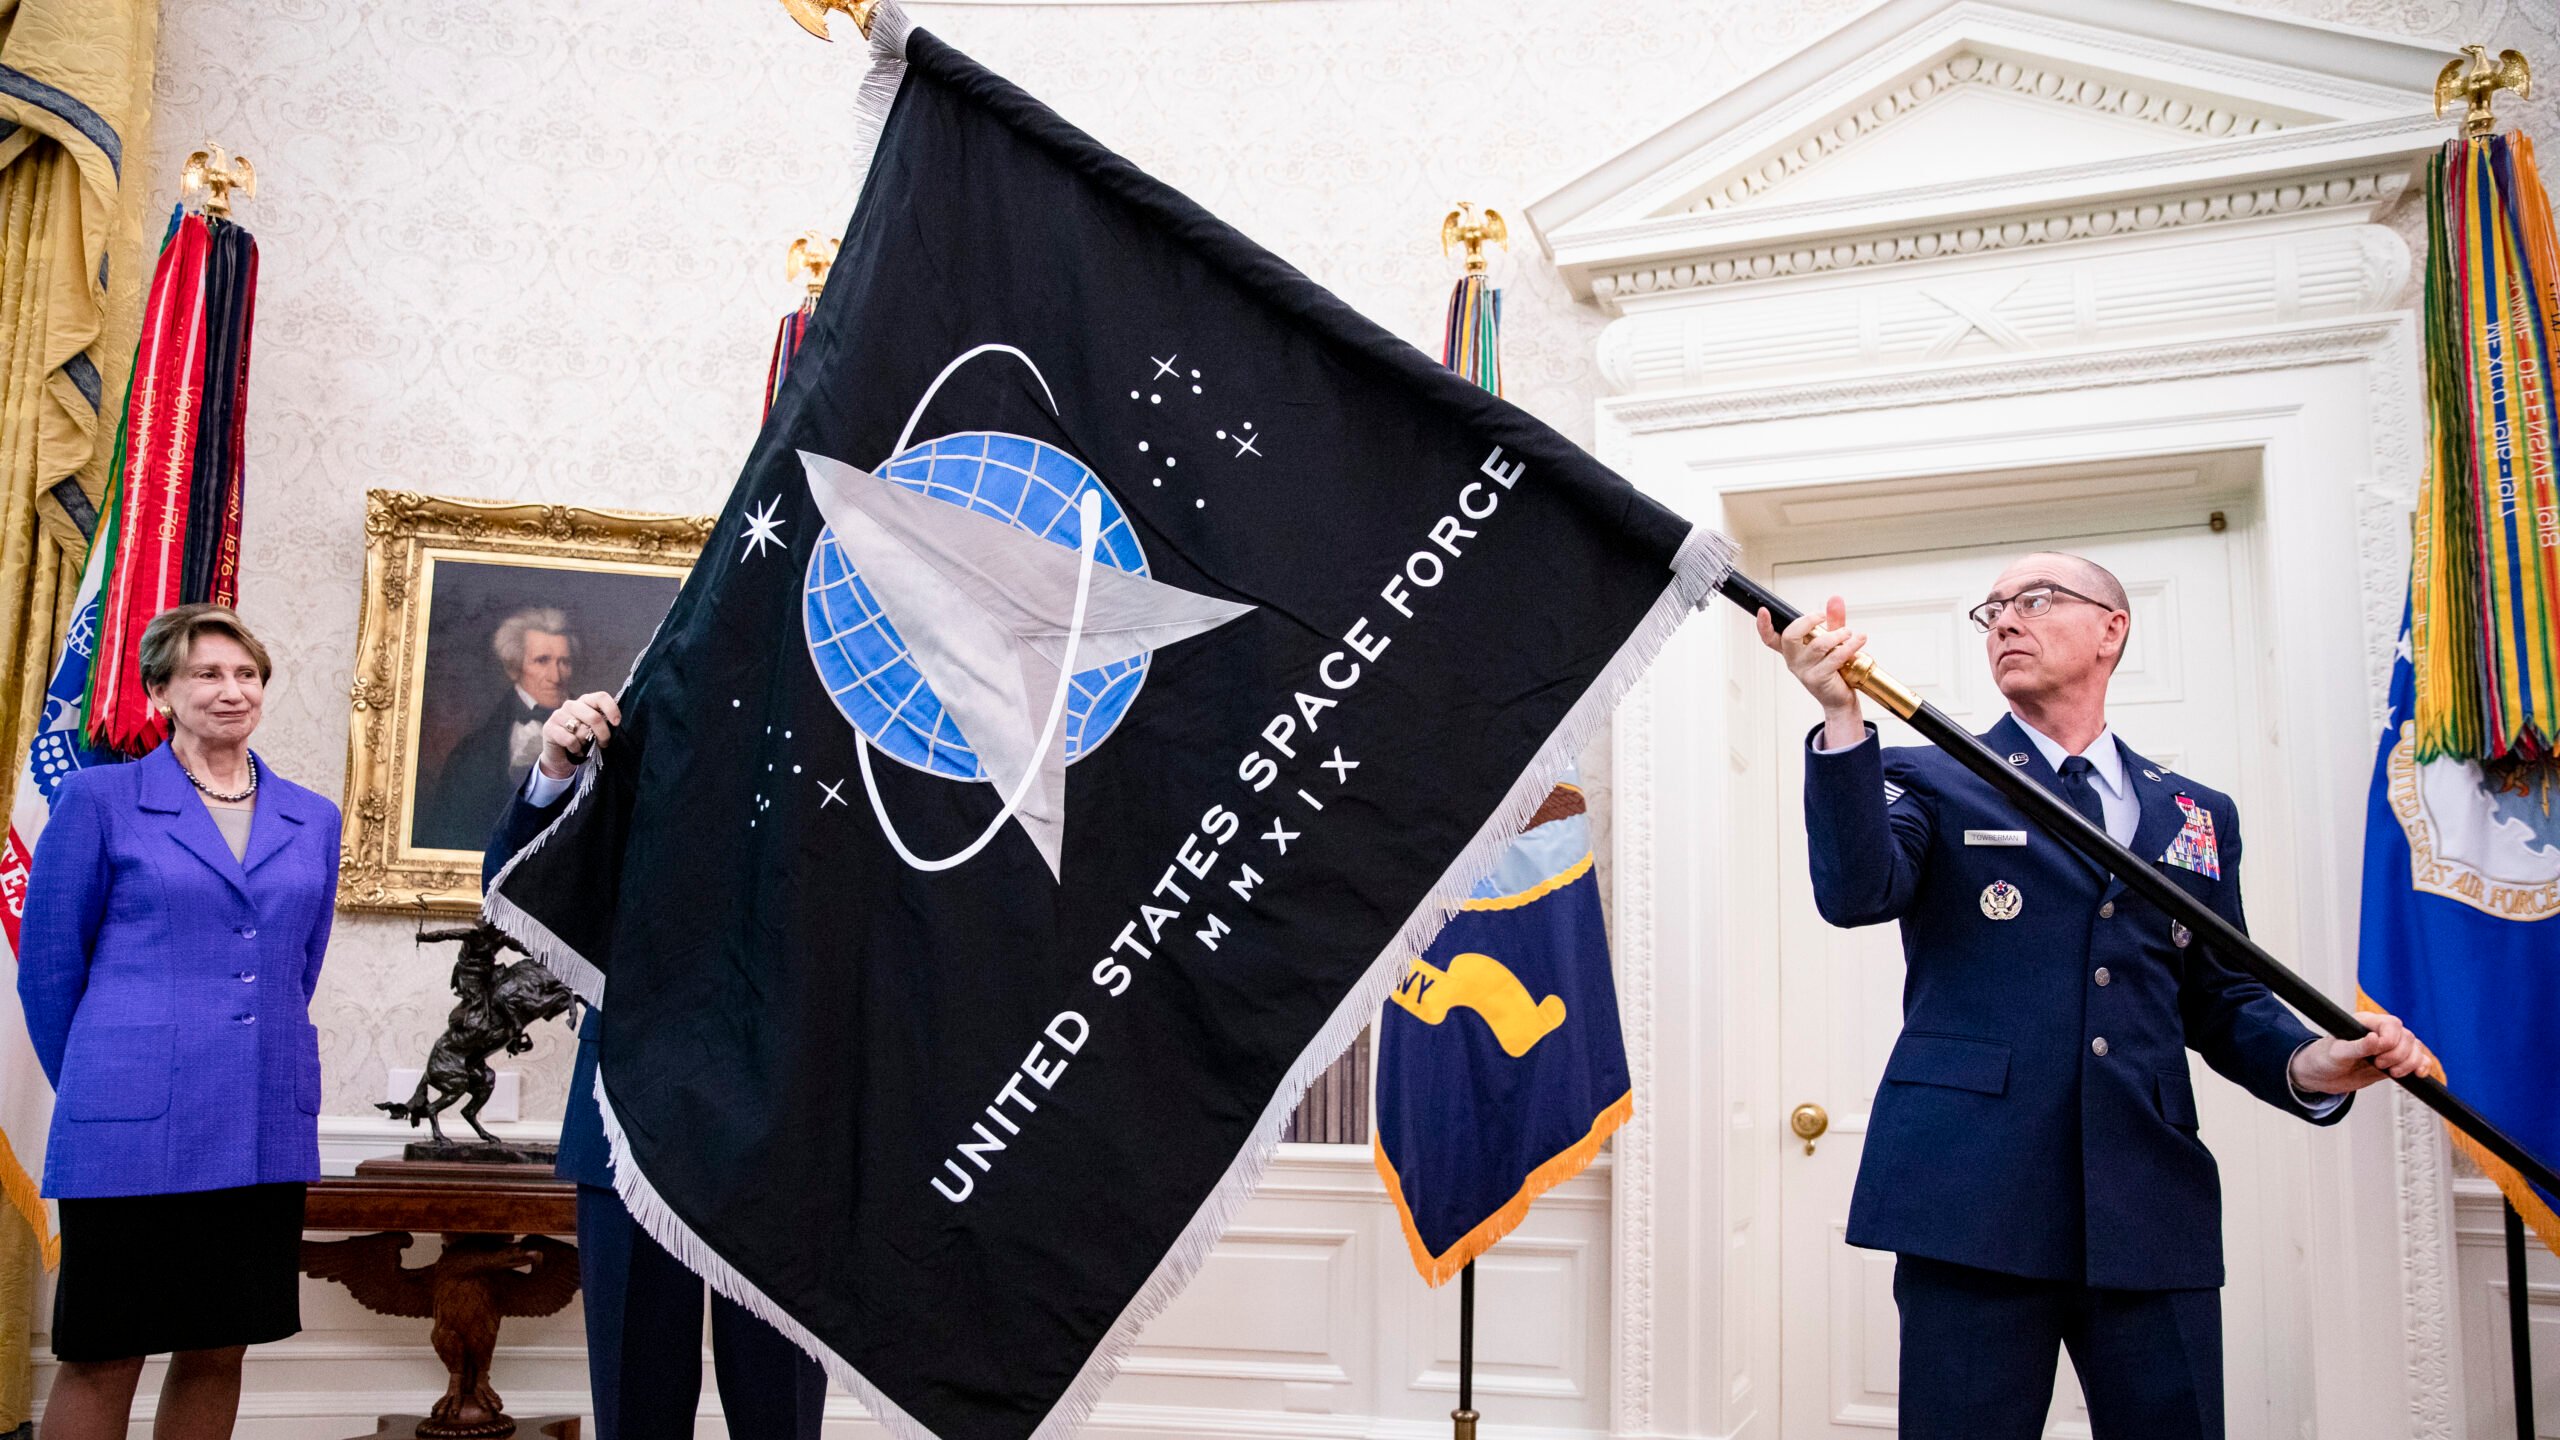 President Trump Signs An Armed Forces Day Proclamation And Participates In U.S. Space Force Flag Presentation